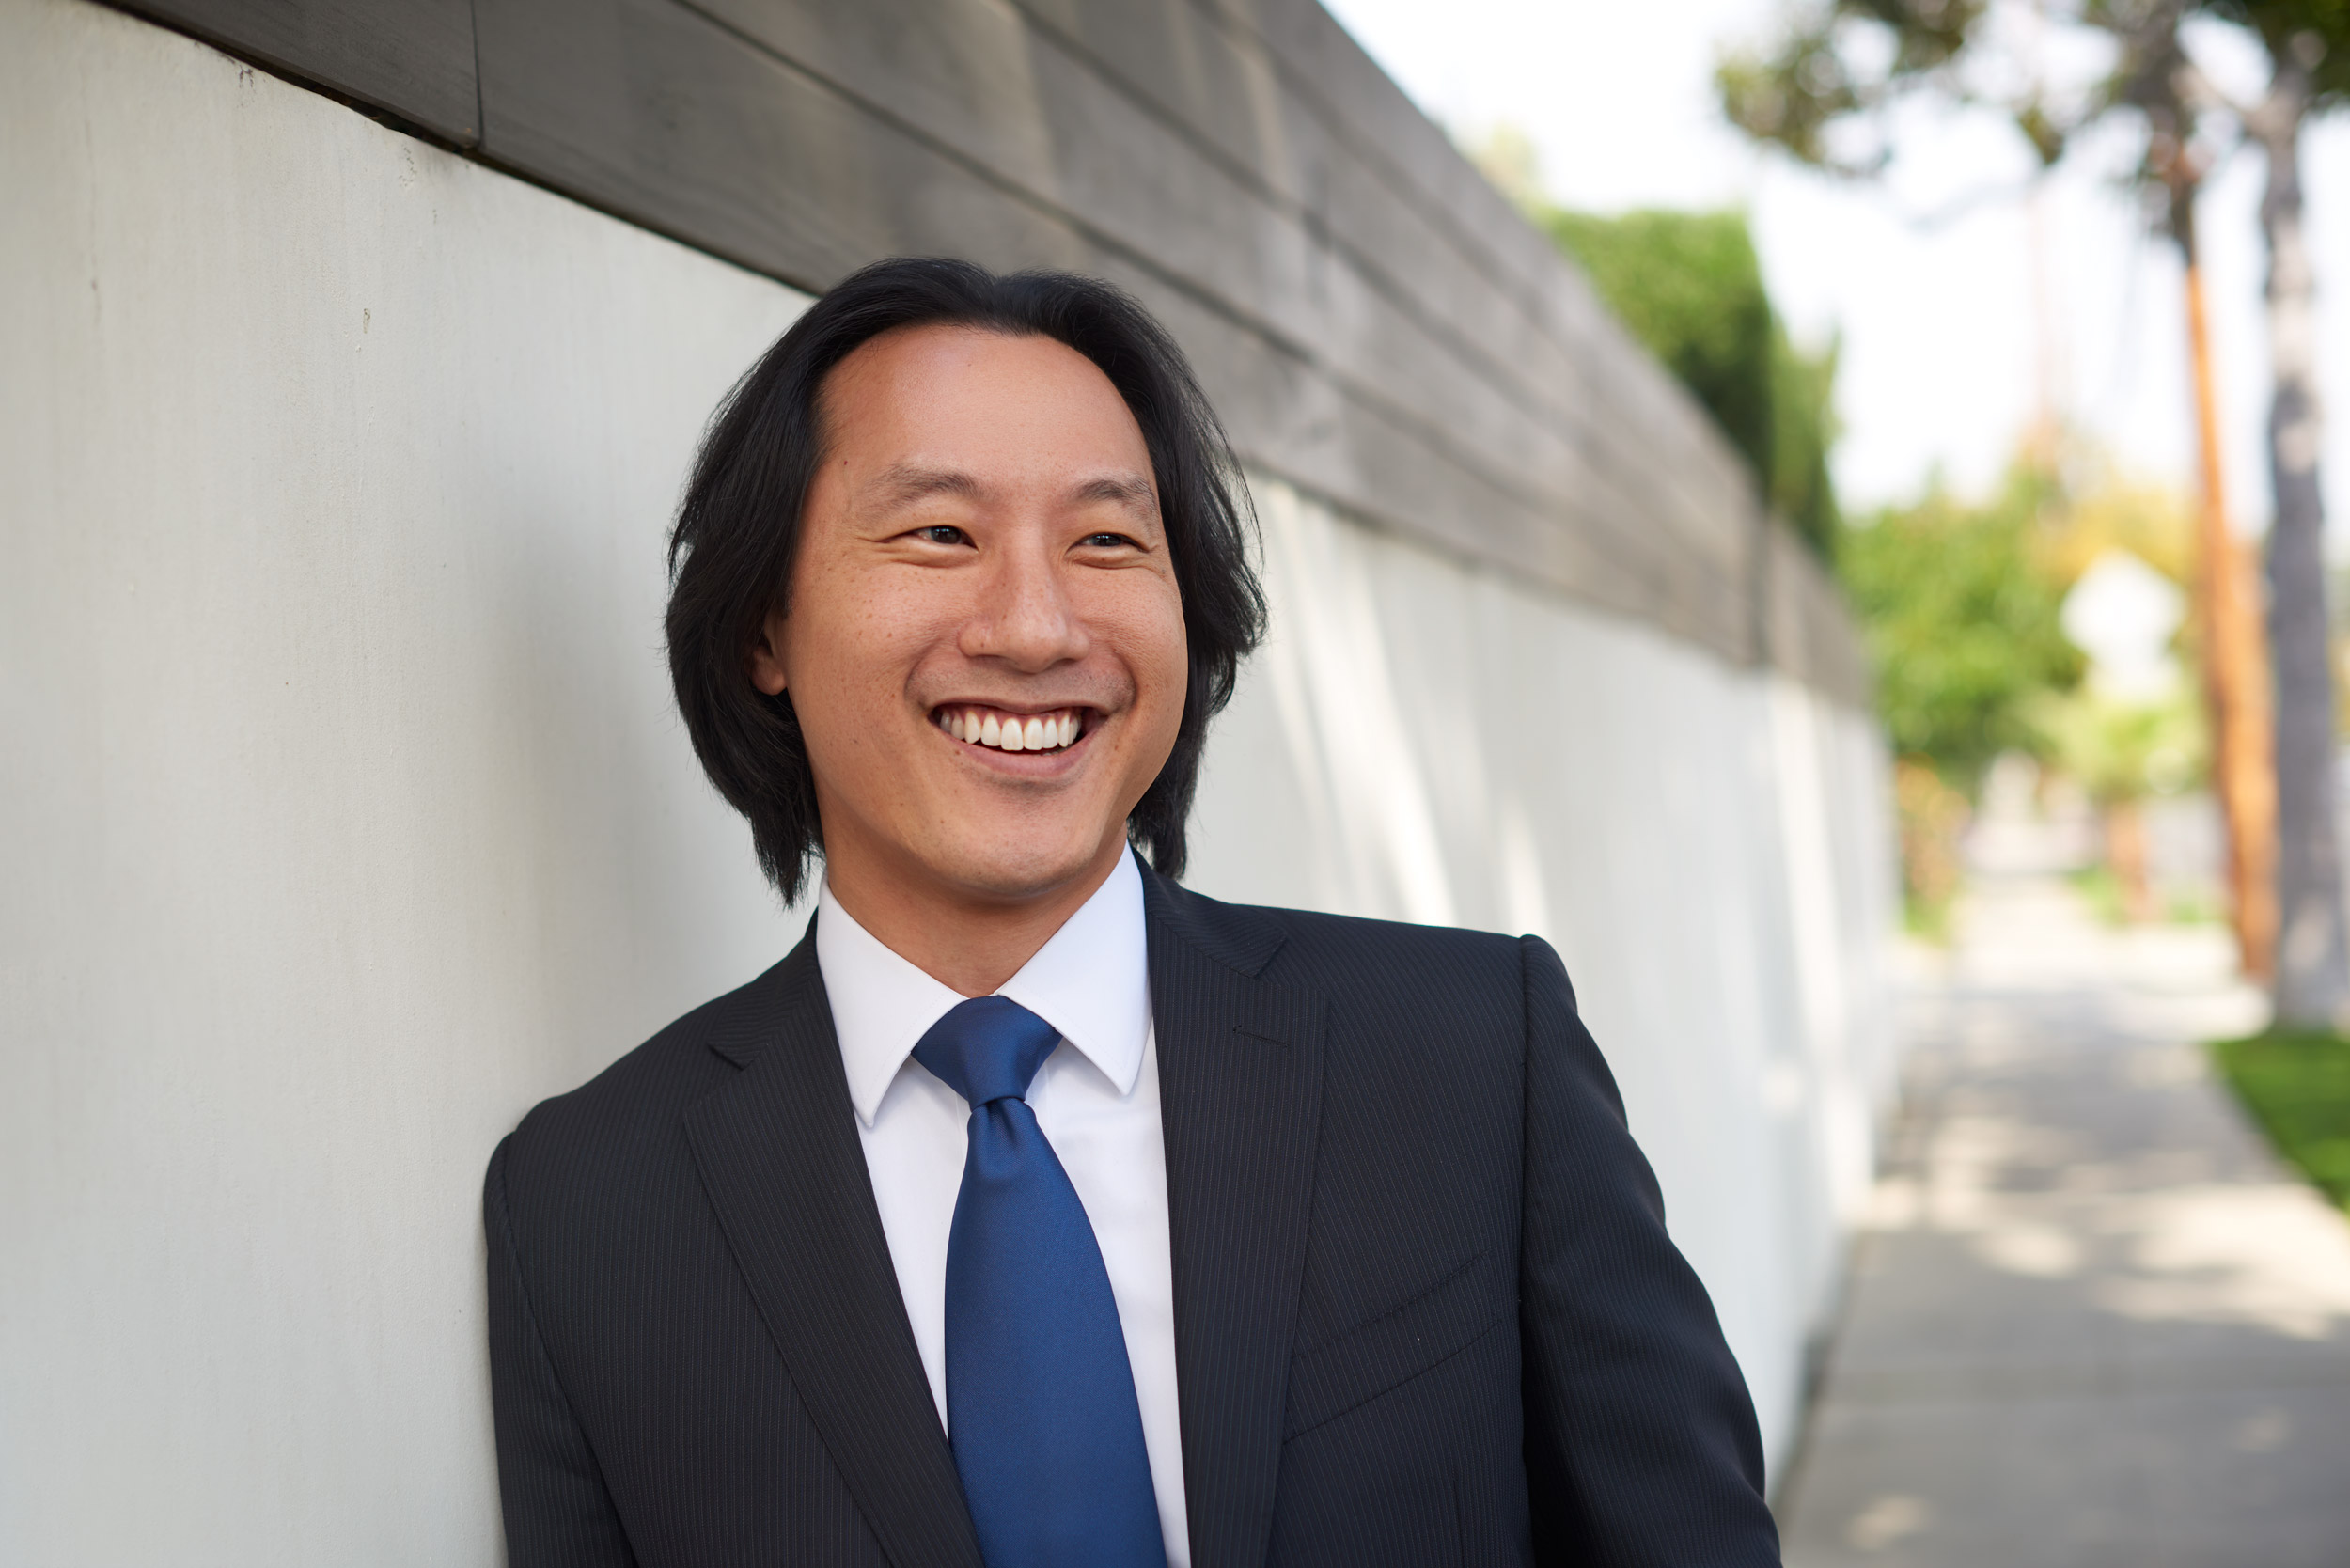 SENIOR-EXECUTIVE-ALLEN-SOONG-POSES-FOR-A-CORPORATE-PORTRAIT-IN-LOS-ANGELES-